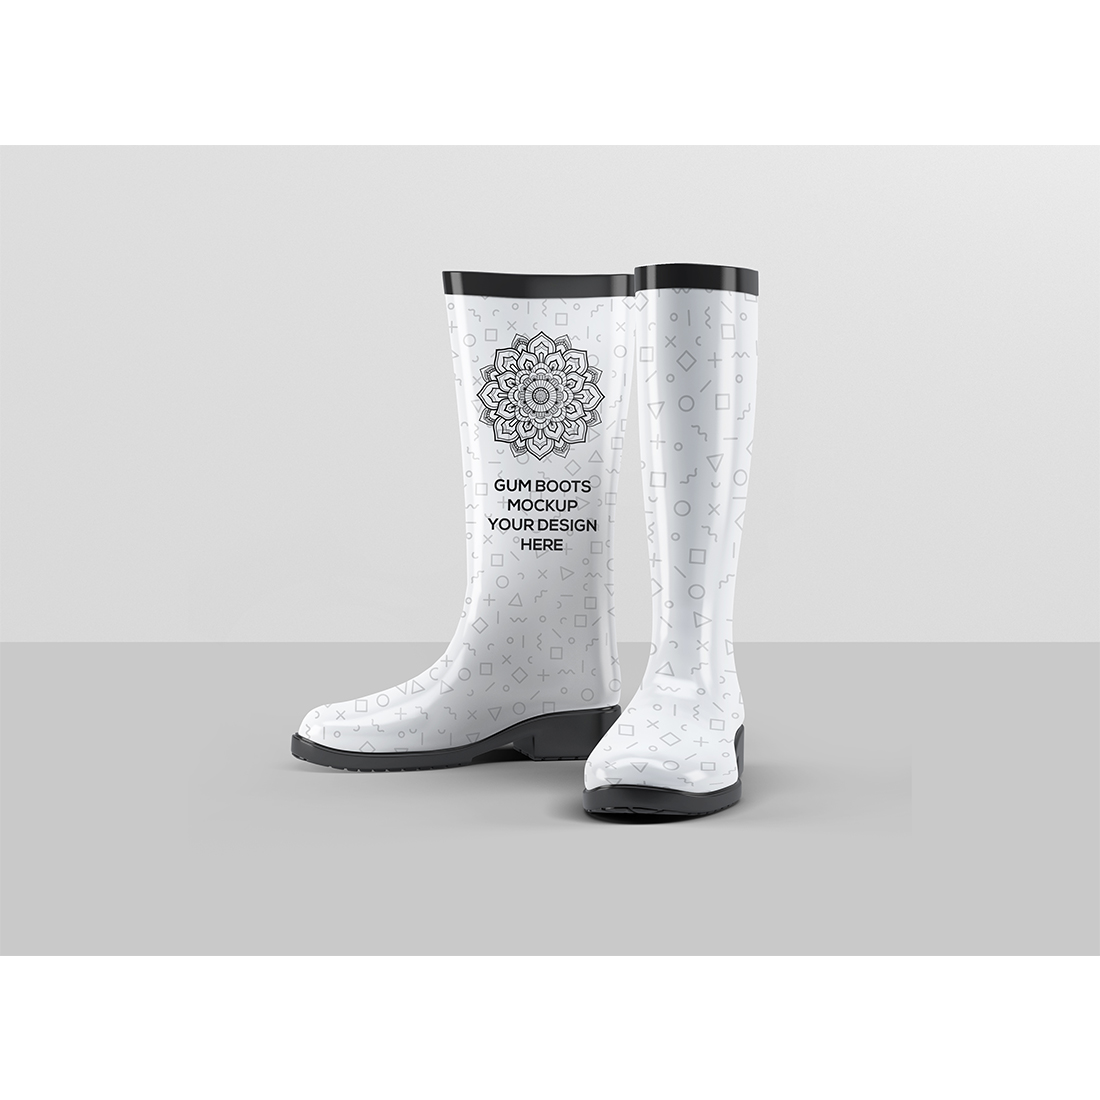 Gumboots Mockup preview image.